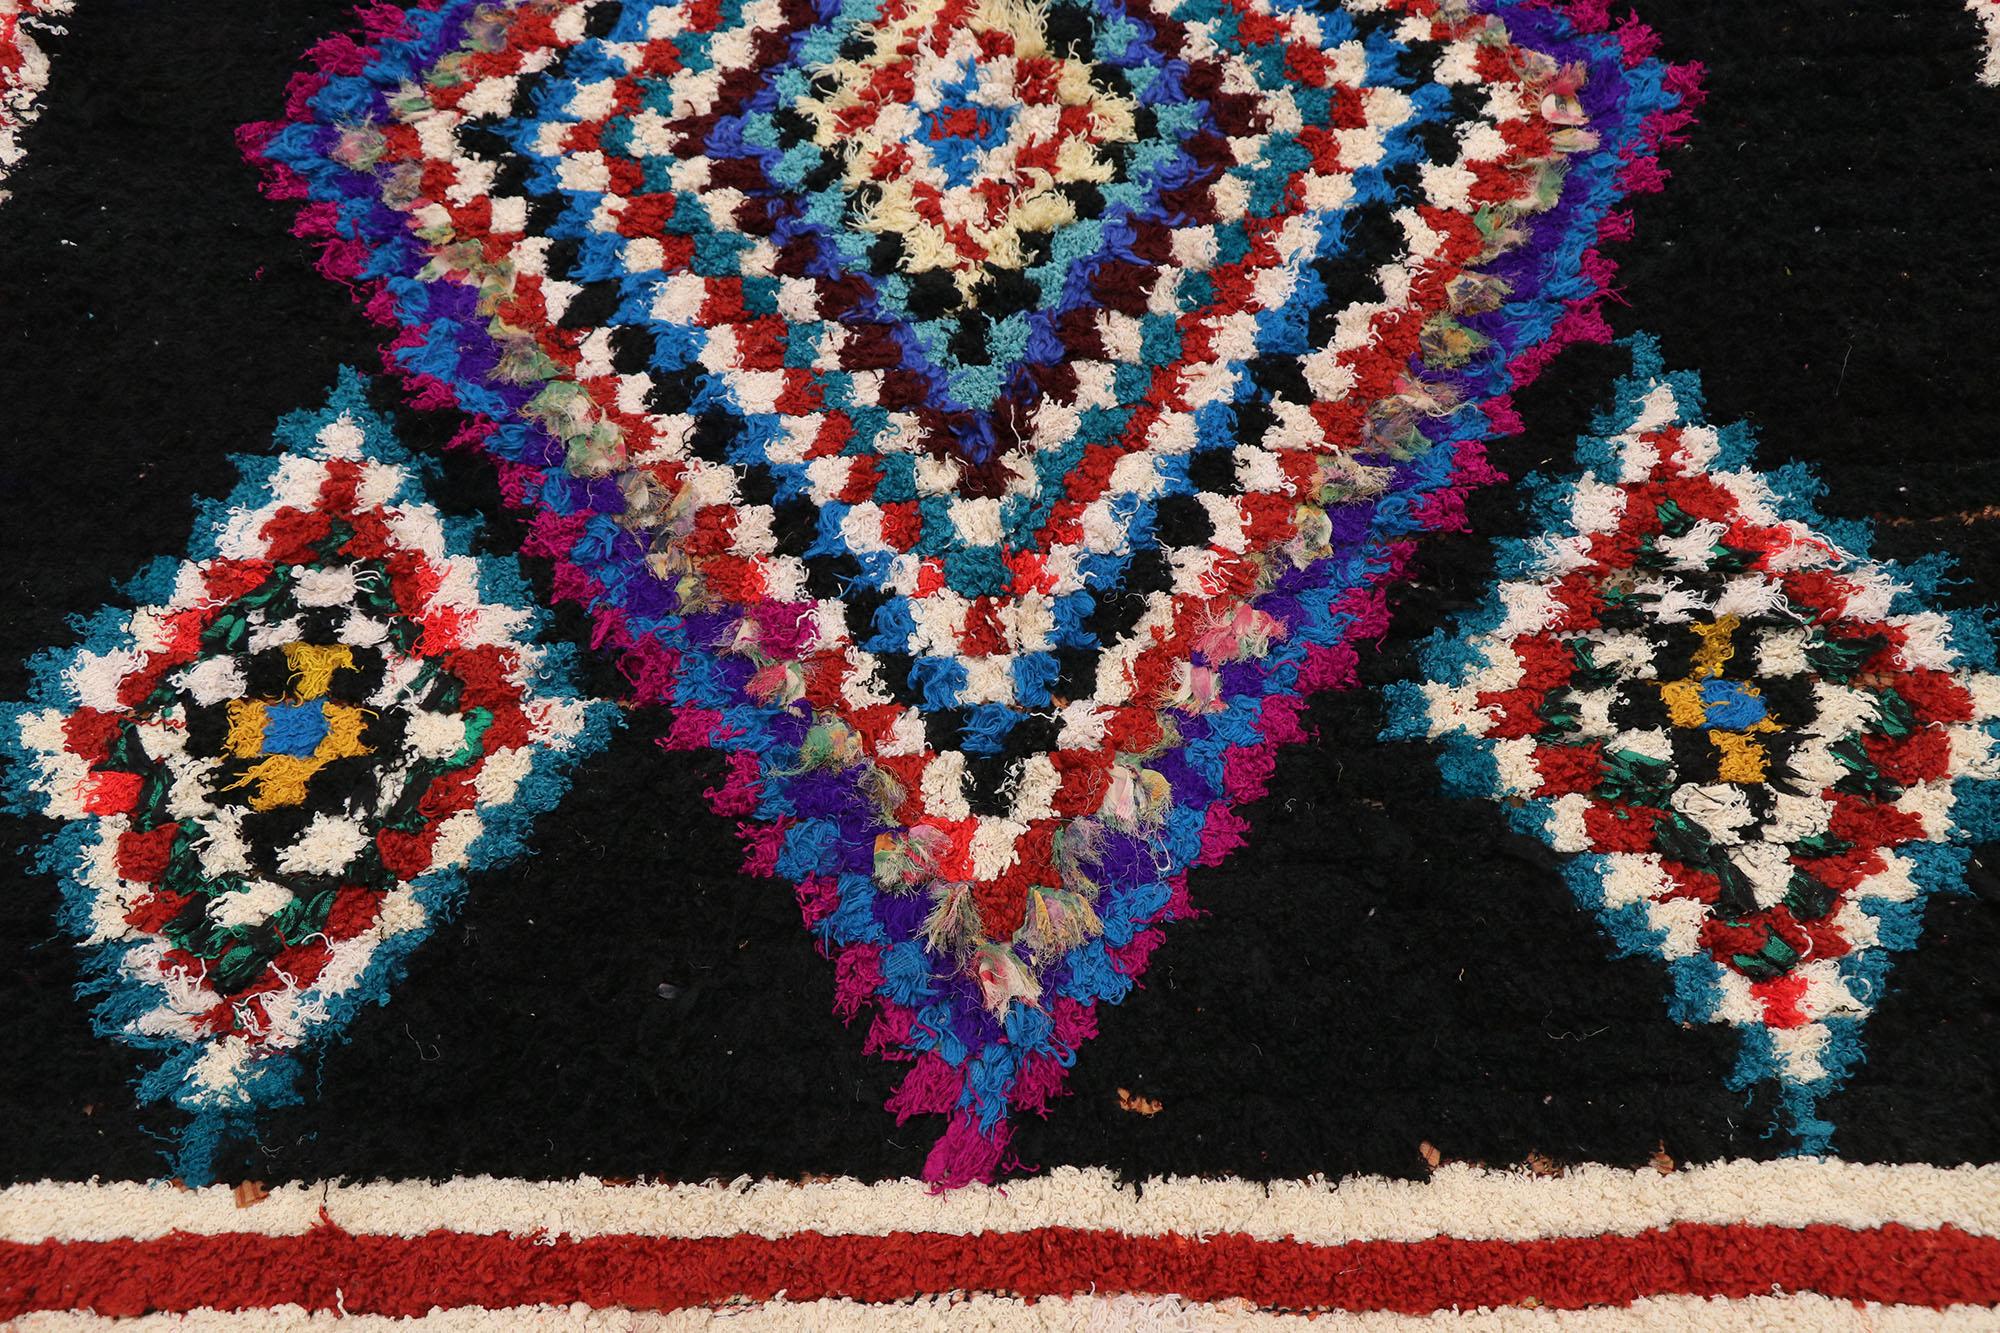 Vintage Berber Moroccan Boucherouite Rug with Boho Chic Tribal Style In Good Condition For Sale In Dallas, TX